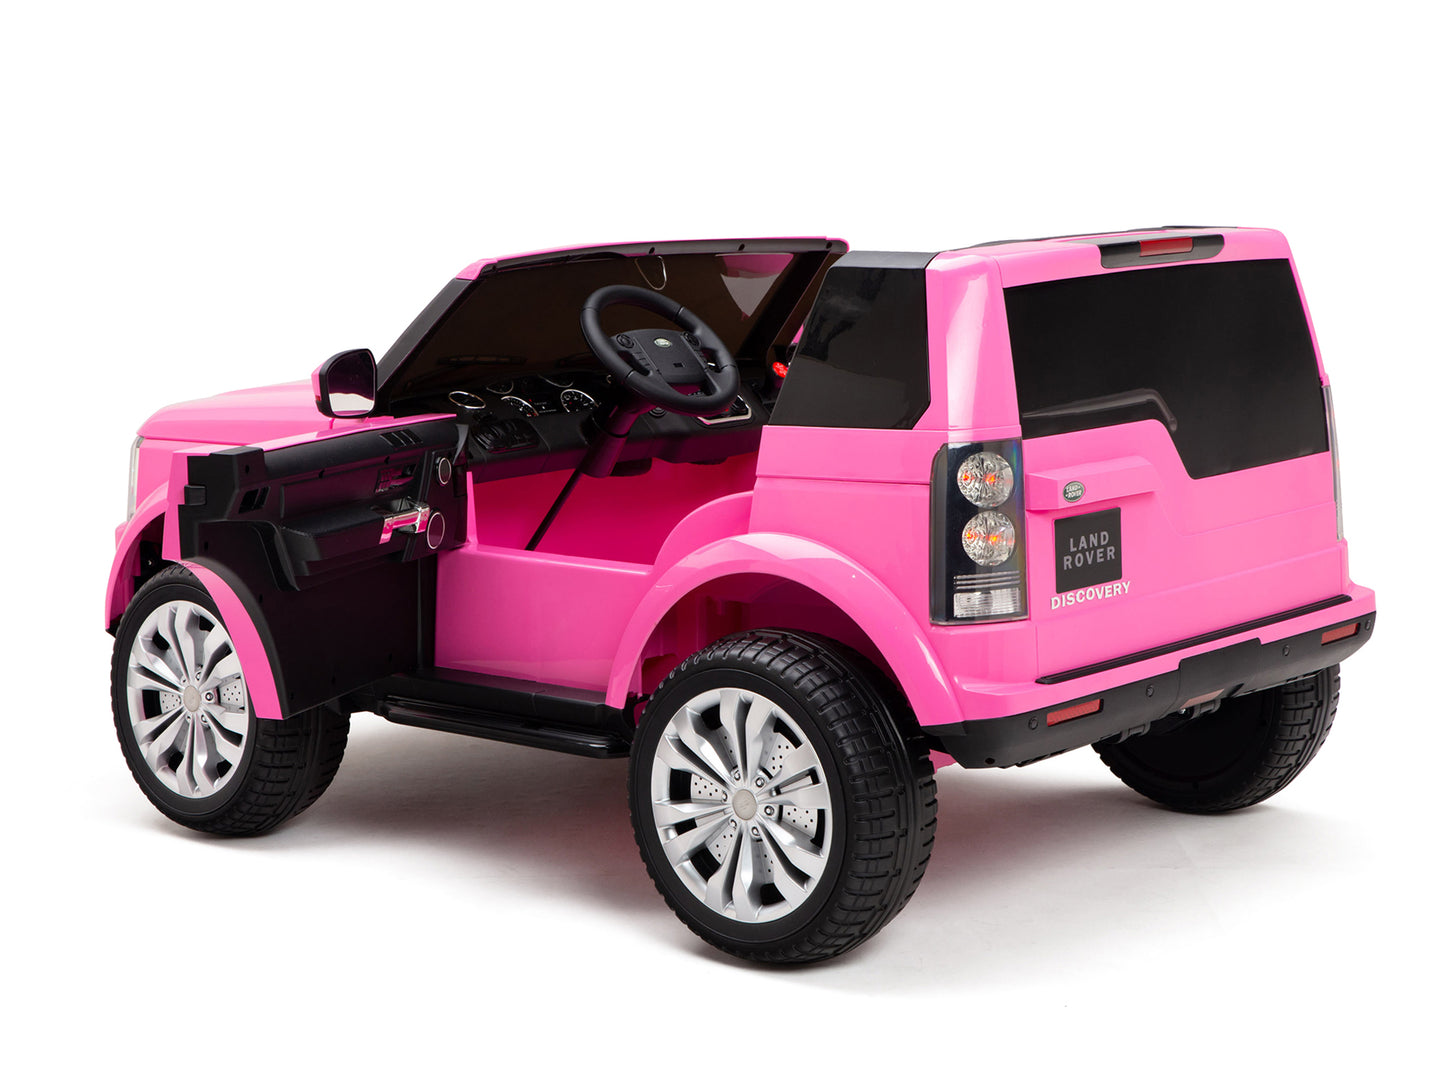 Kids 12V Land Rover Discovery Ride On SUV / Truck with Remote - Pink